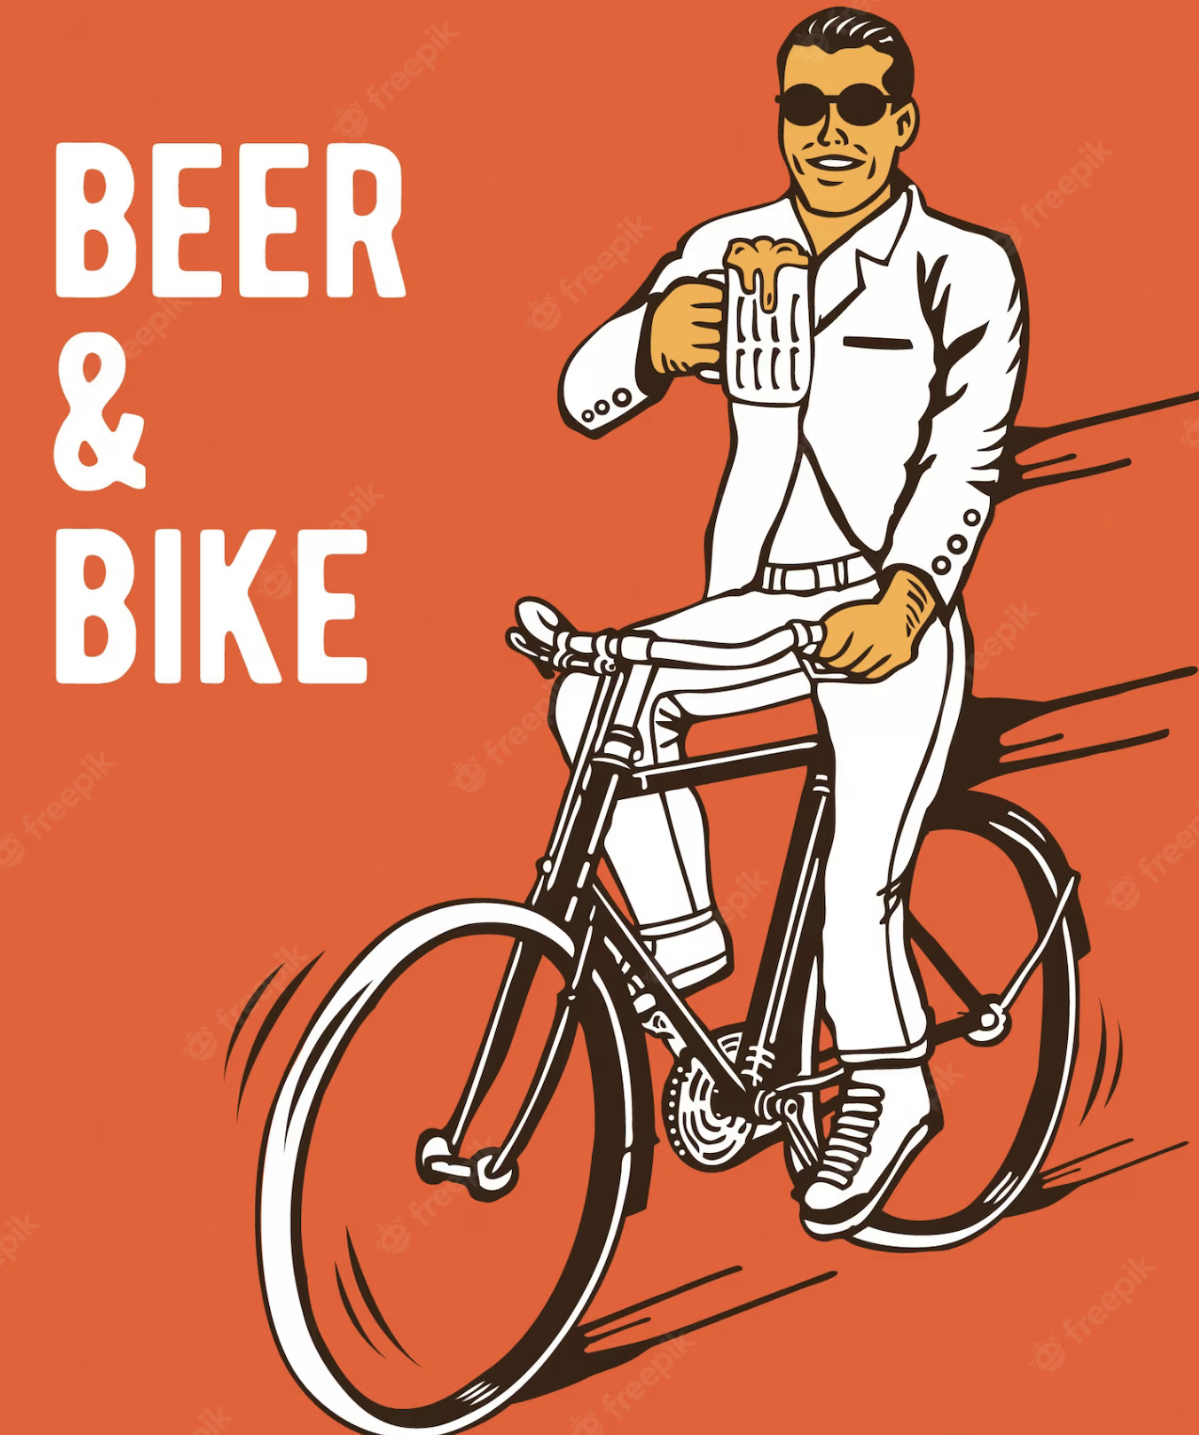 Cycling and drinking